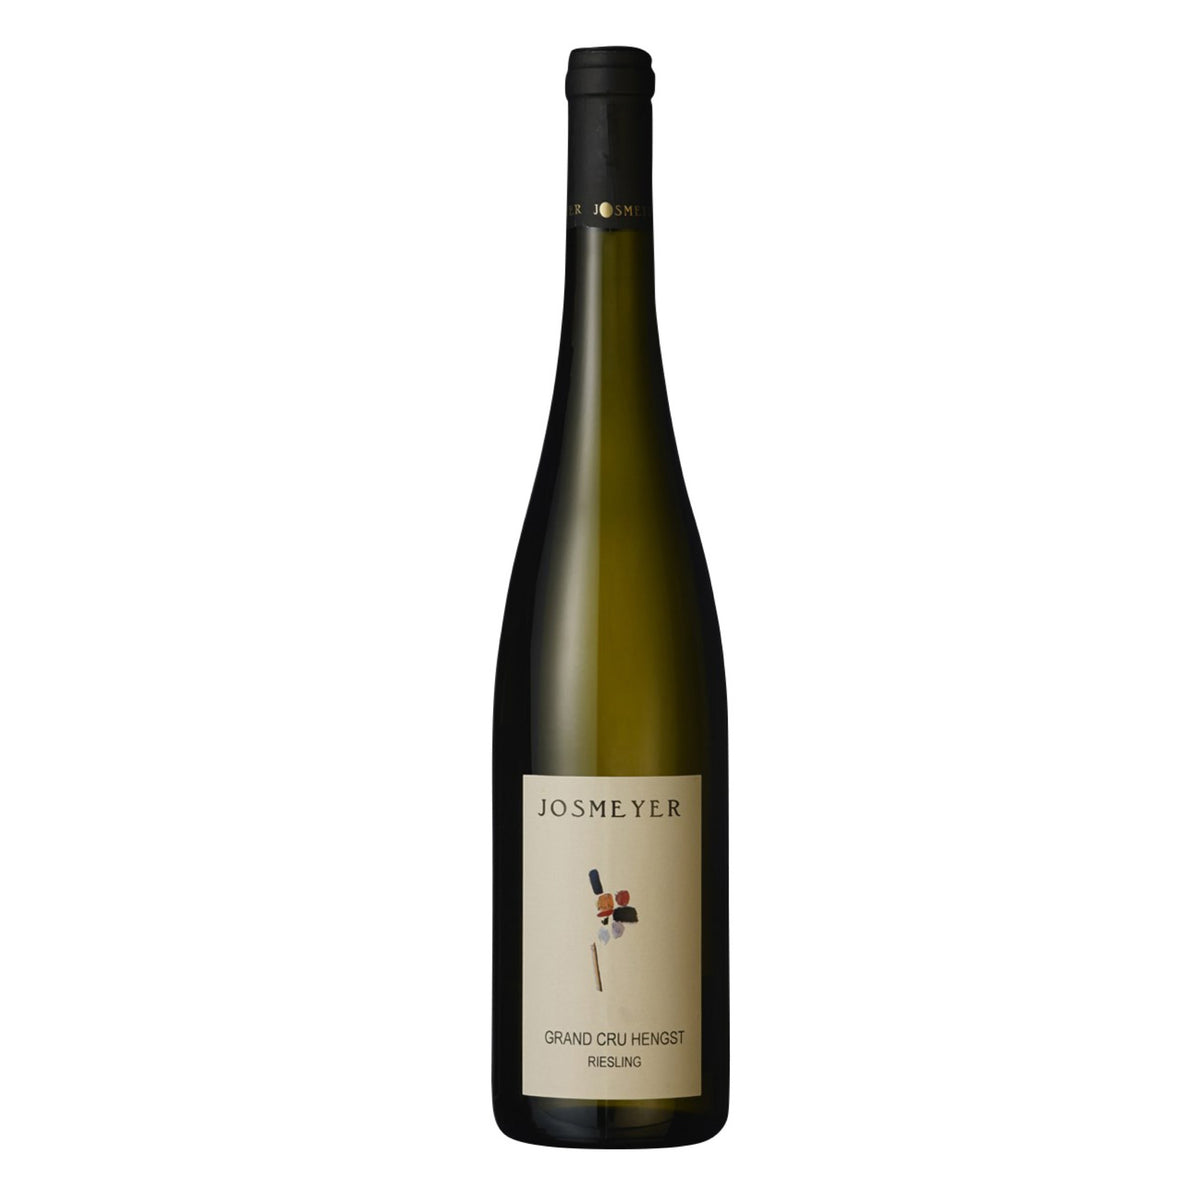 Domaine JOSMEYER Riesling Grand Cru &quot;Hengst&quot; 2010